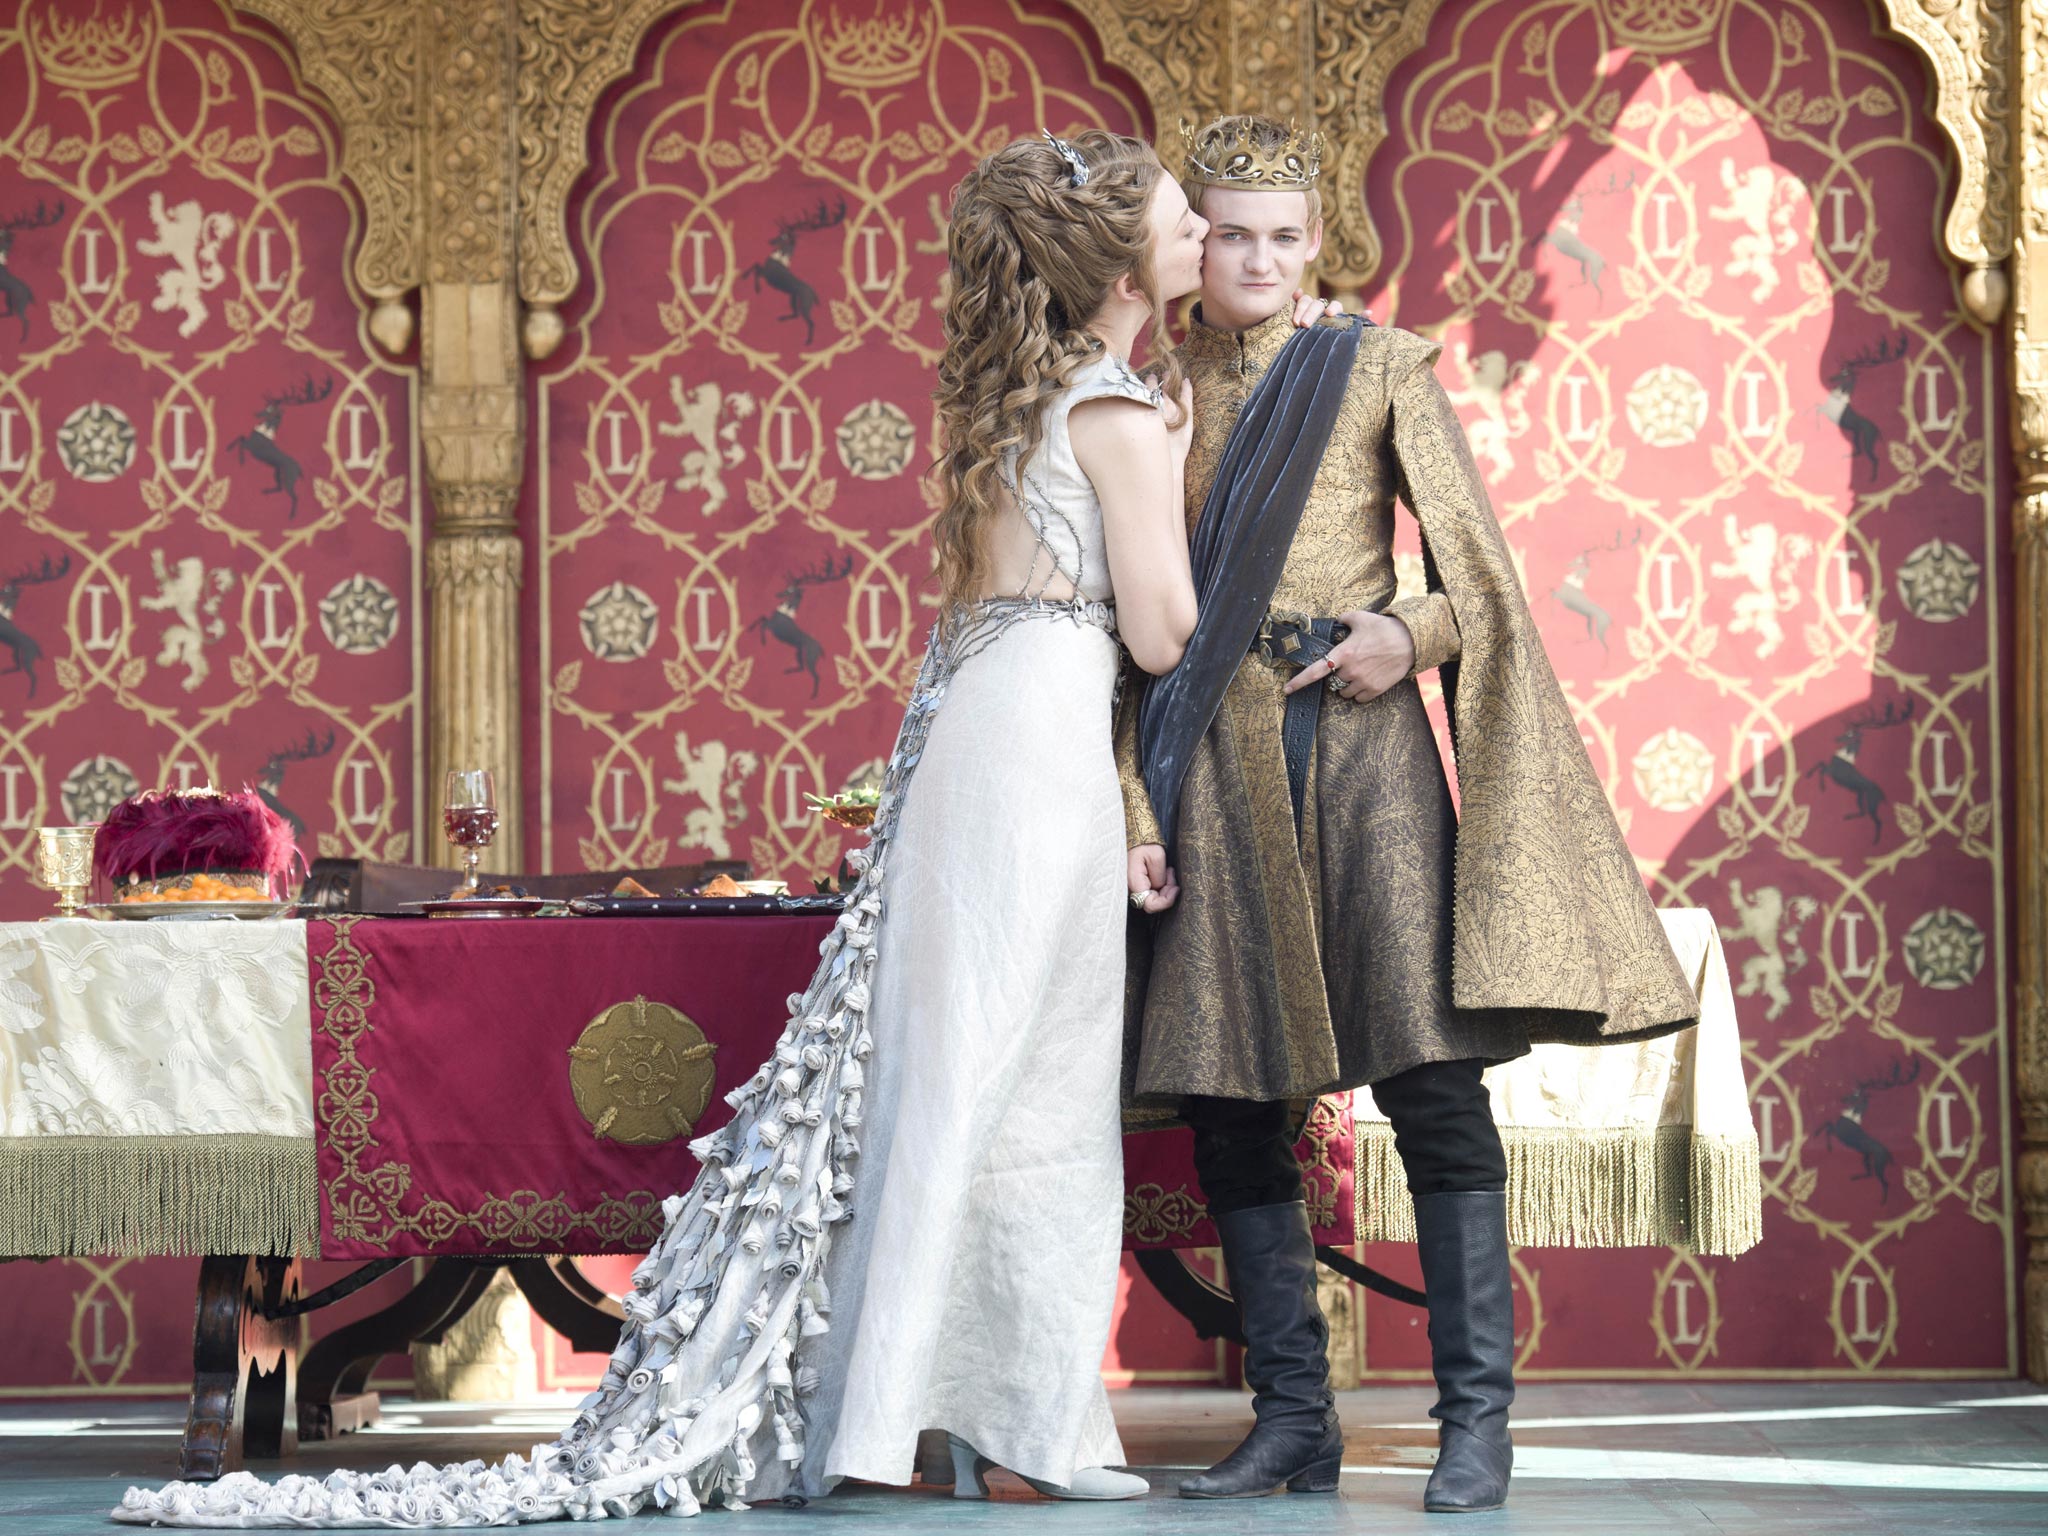 Game of Thrones' Red Wedding, which — NO SPOILERS